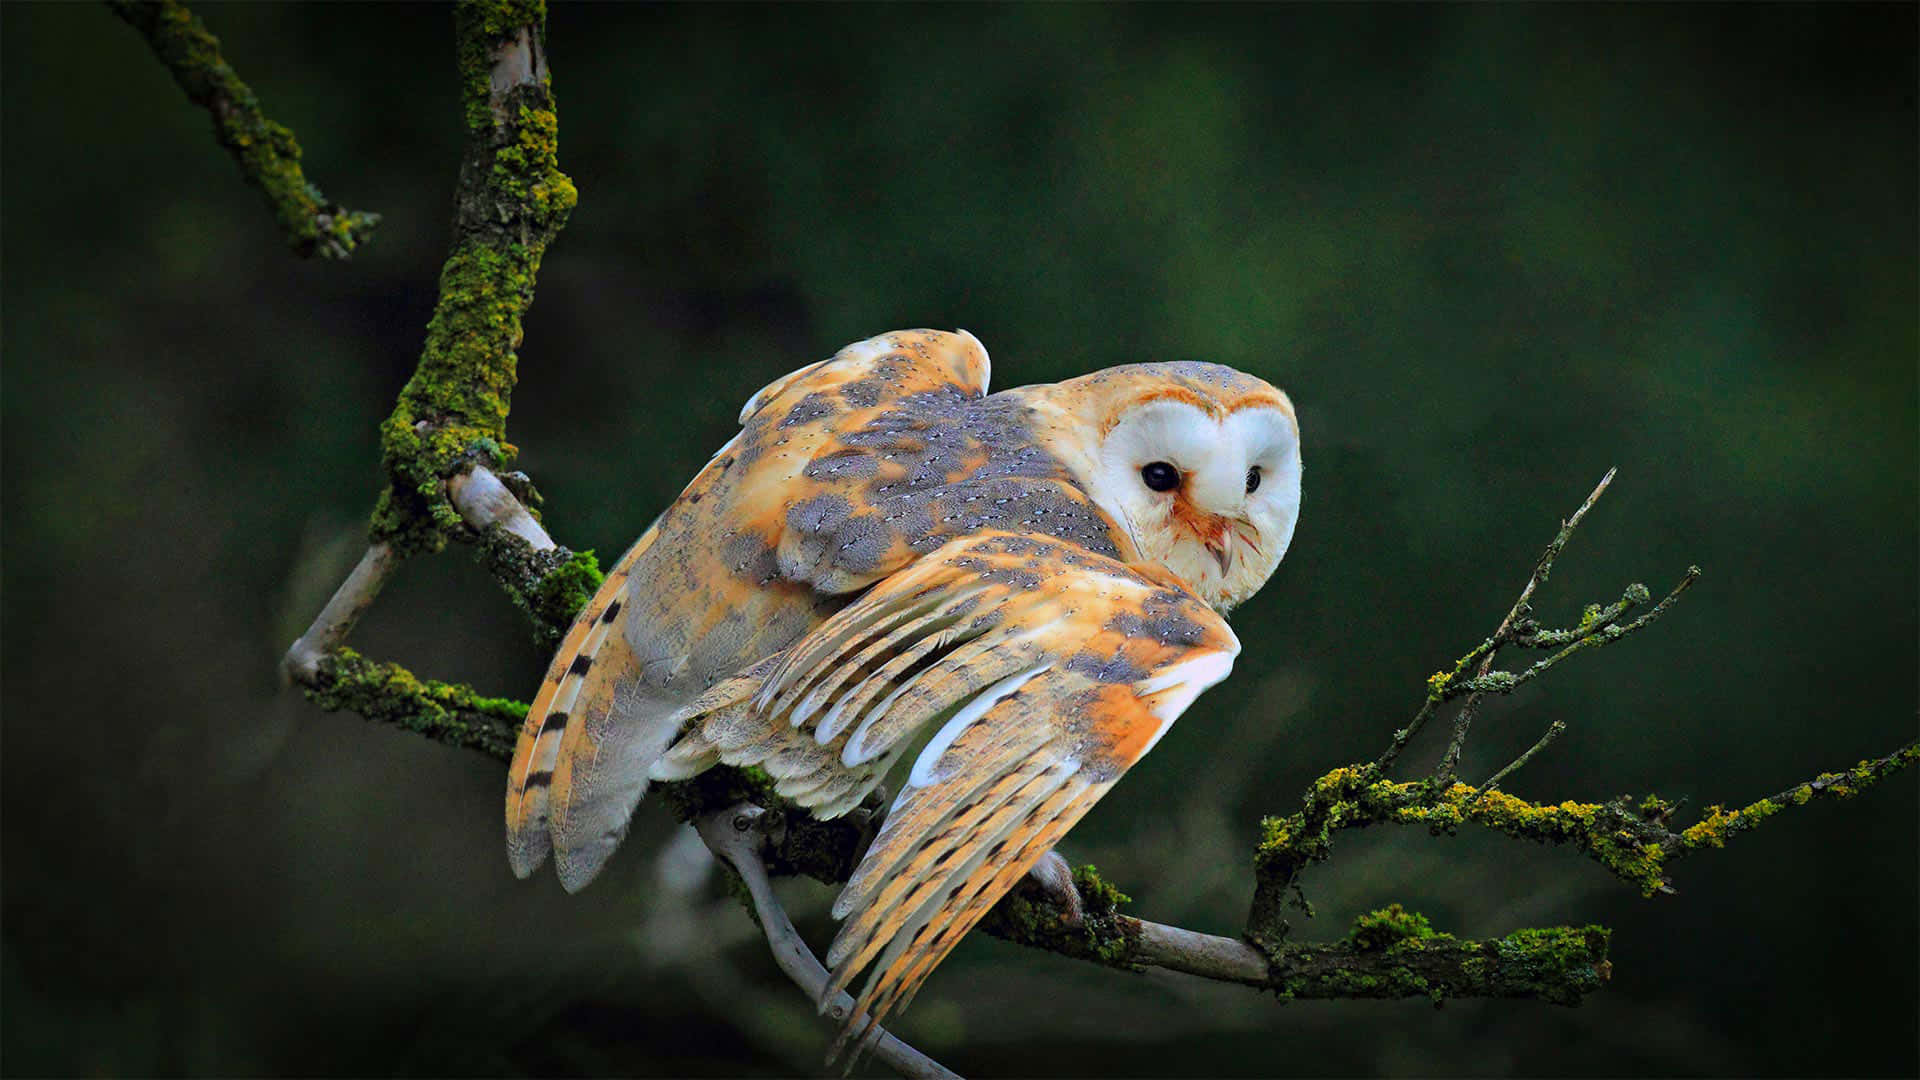 A Barn Owl Perched On A Branch